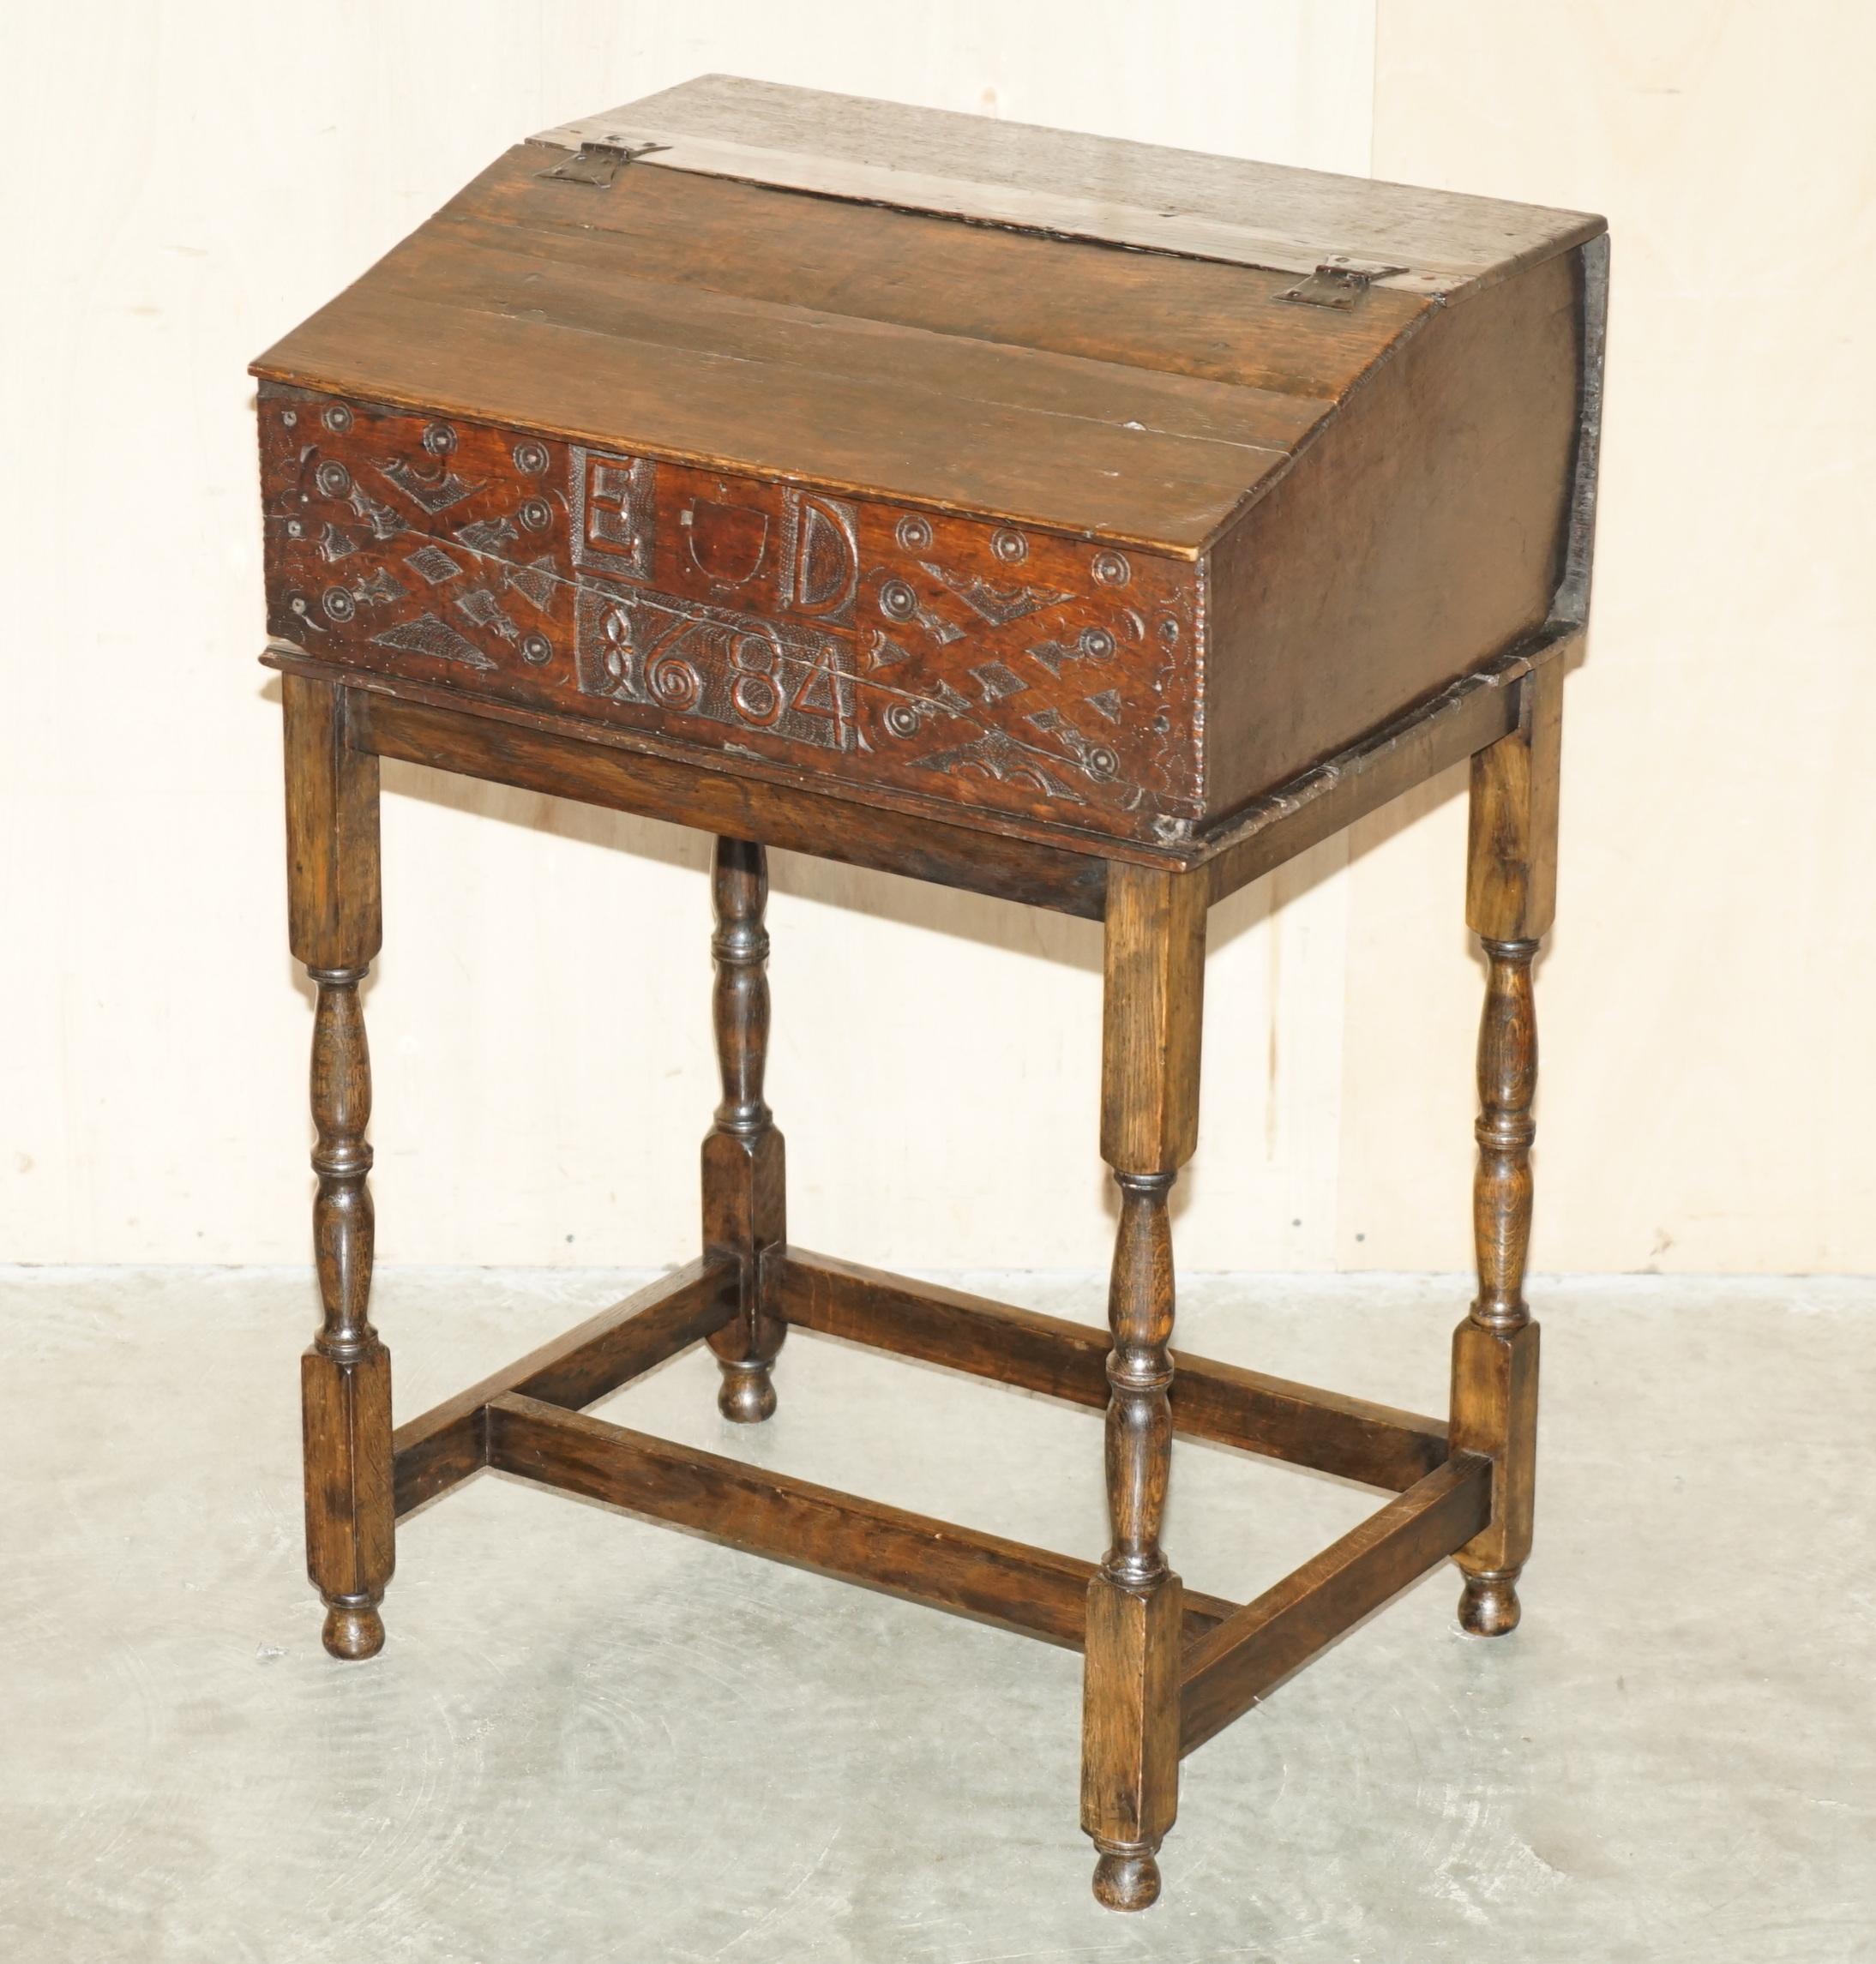 Royal House Antiques

Royal House Antiques is delighted to offer for sale this stunning, late 17th century, hand caved 1684 lift top writing work table traditionally used for bible storage 

Please note the delivery fee listed is just a guide, it